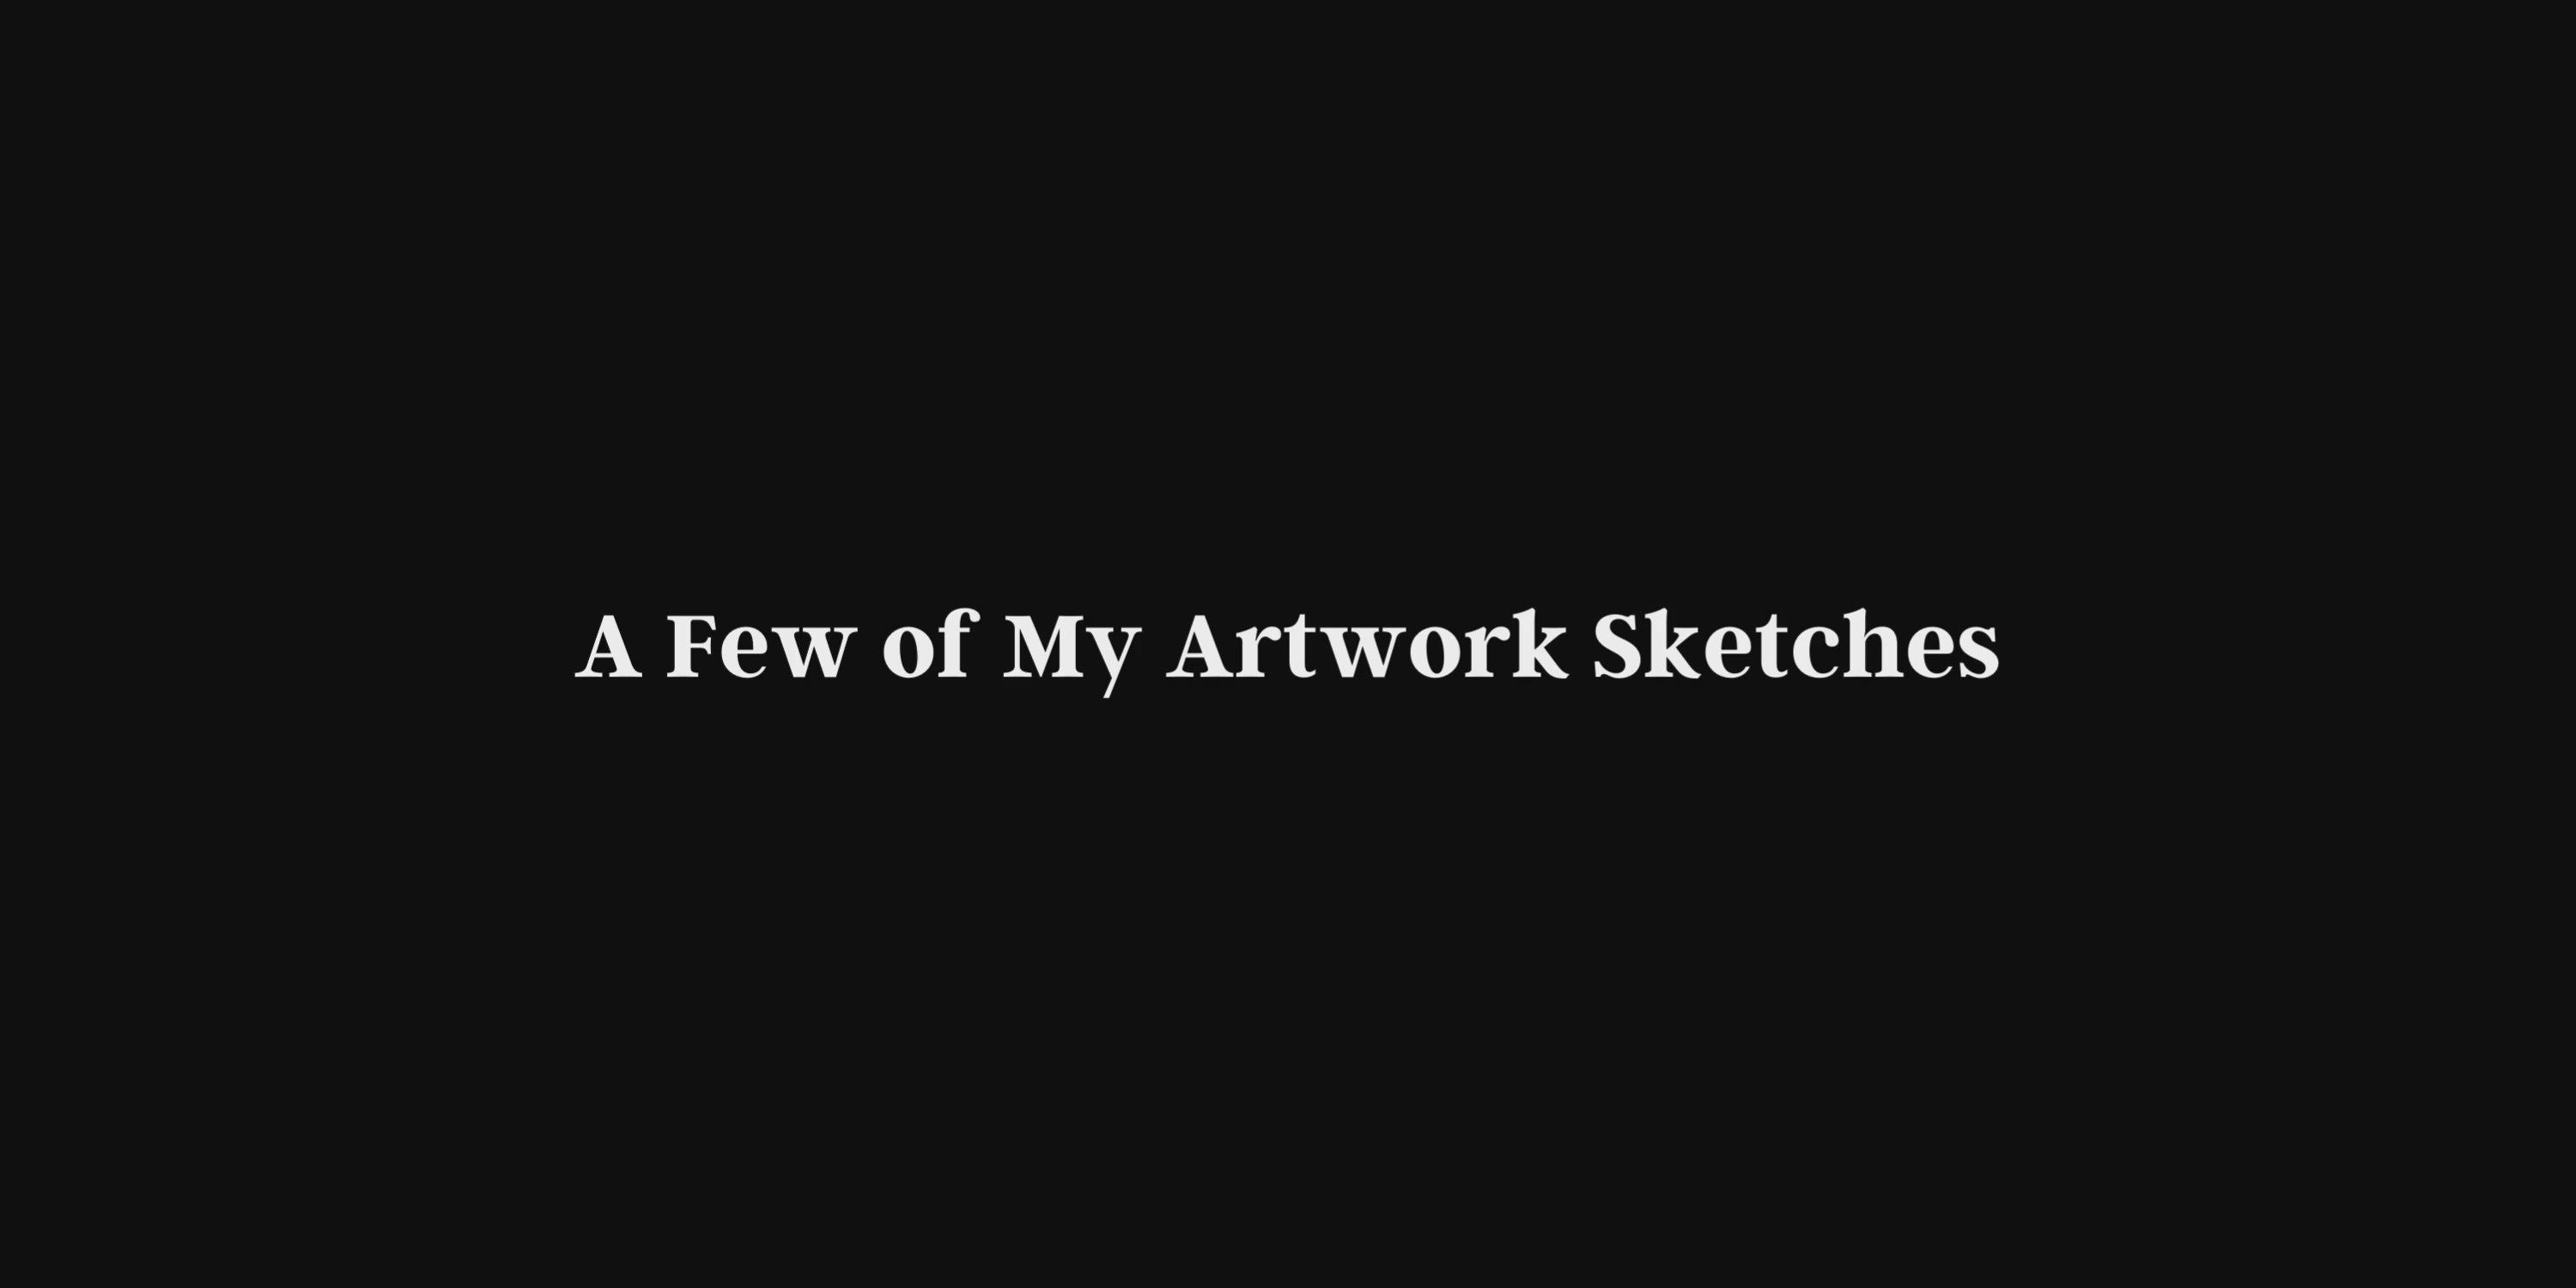 Load video: A 5 second video of some of my hand drawing sketches